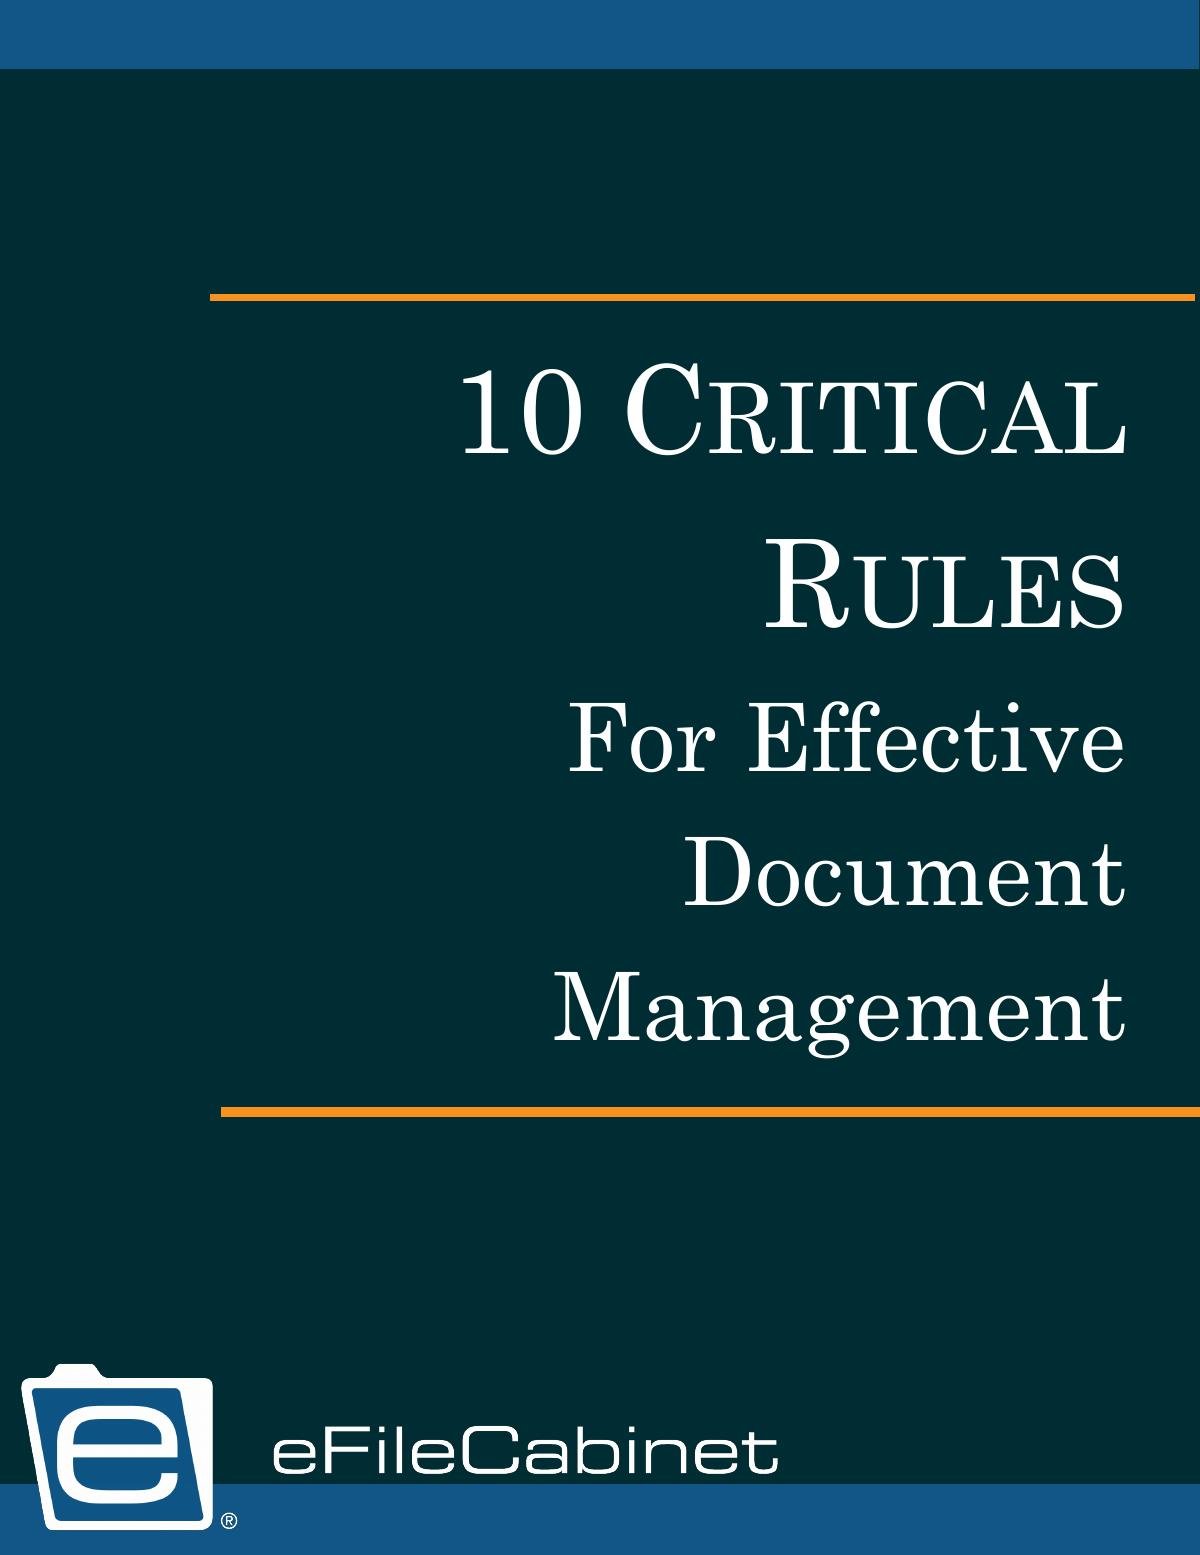 10 Critical Rules for Effective Document Management